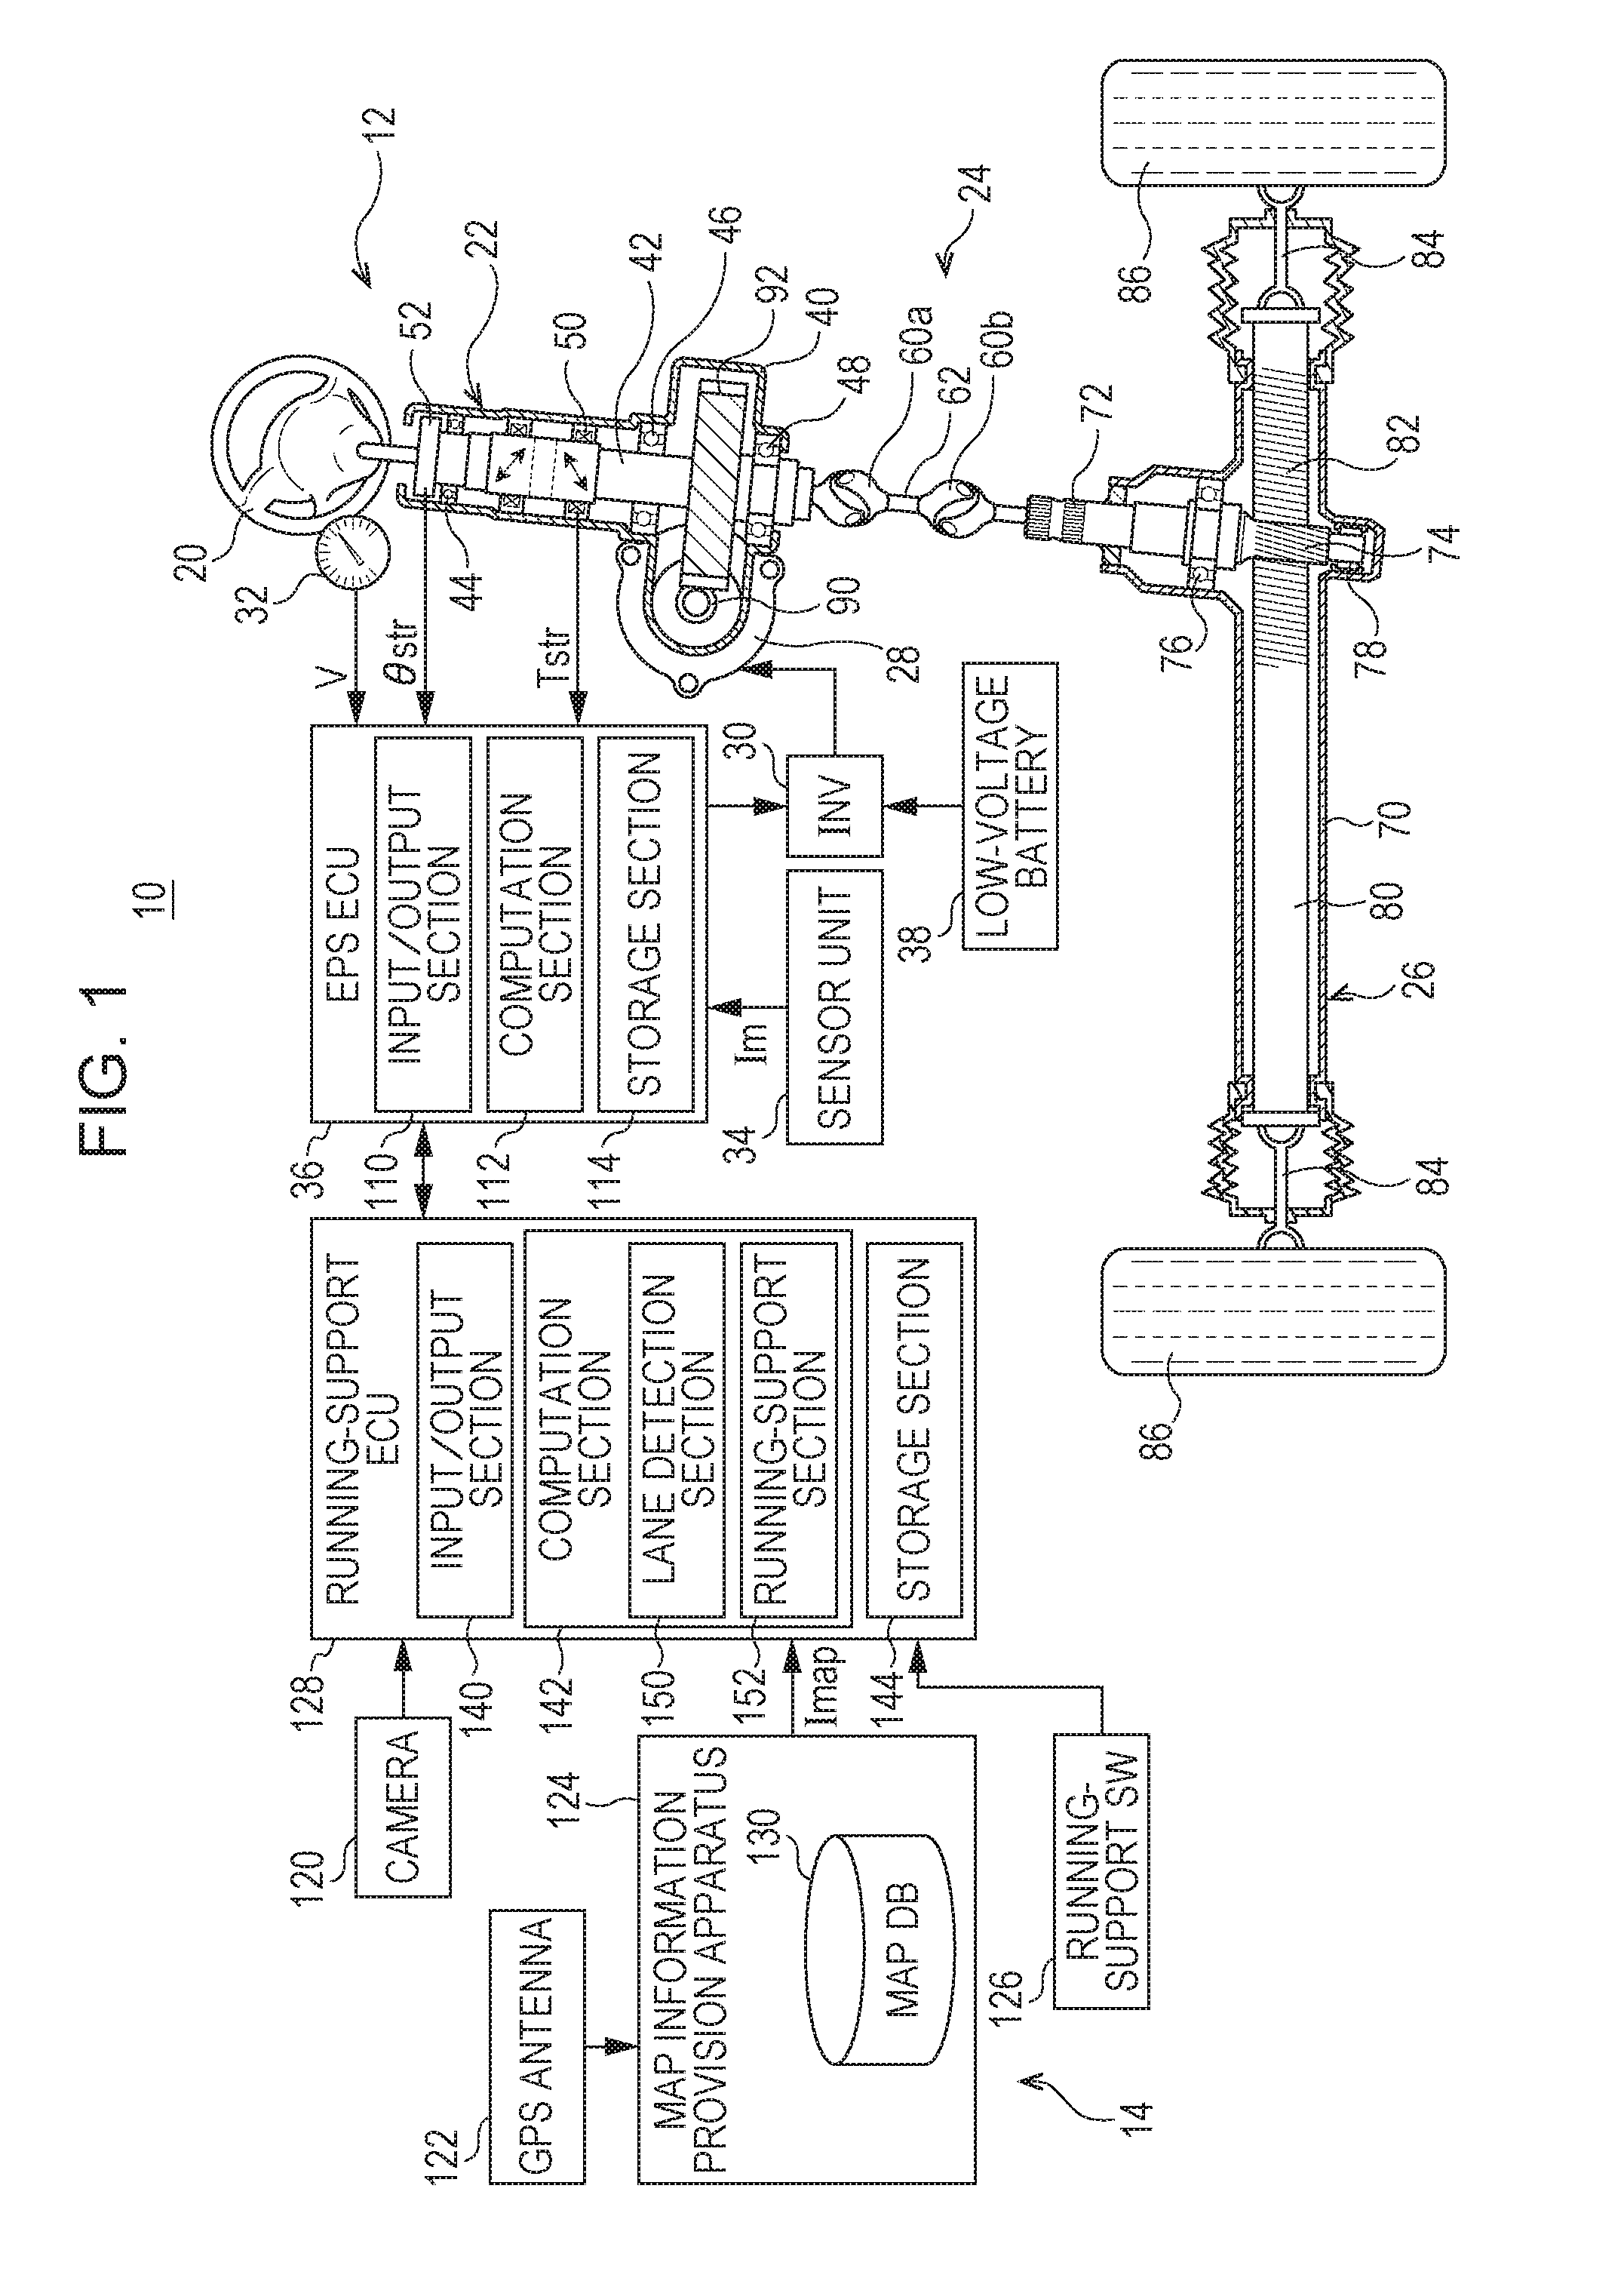 Running-support system and running-support method